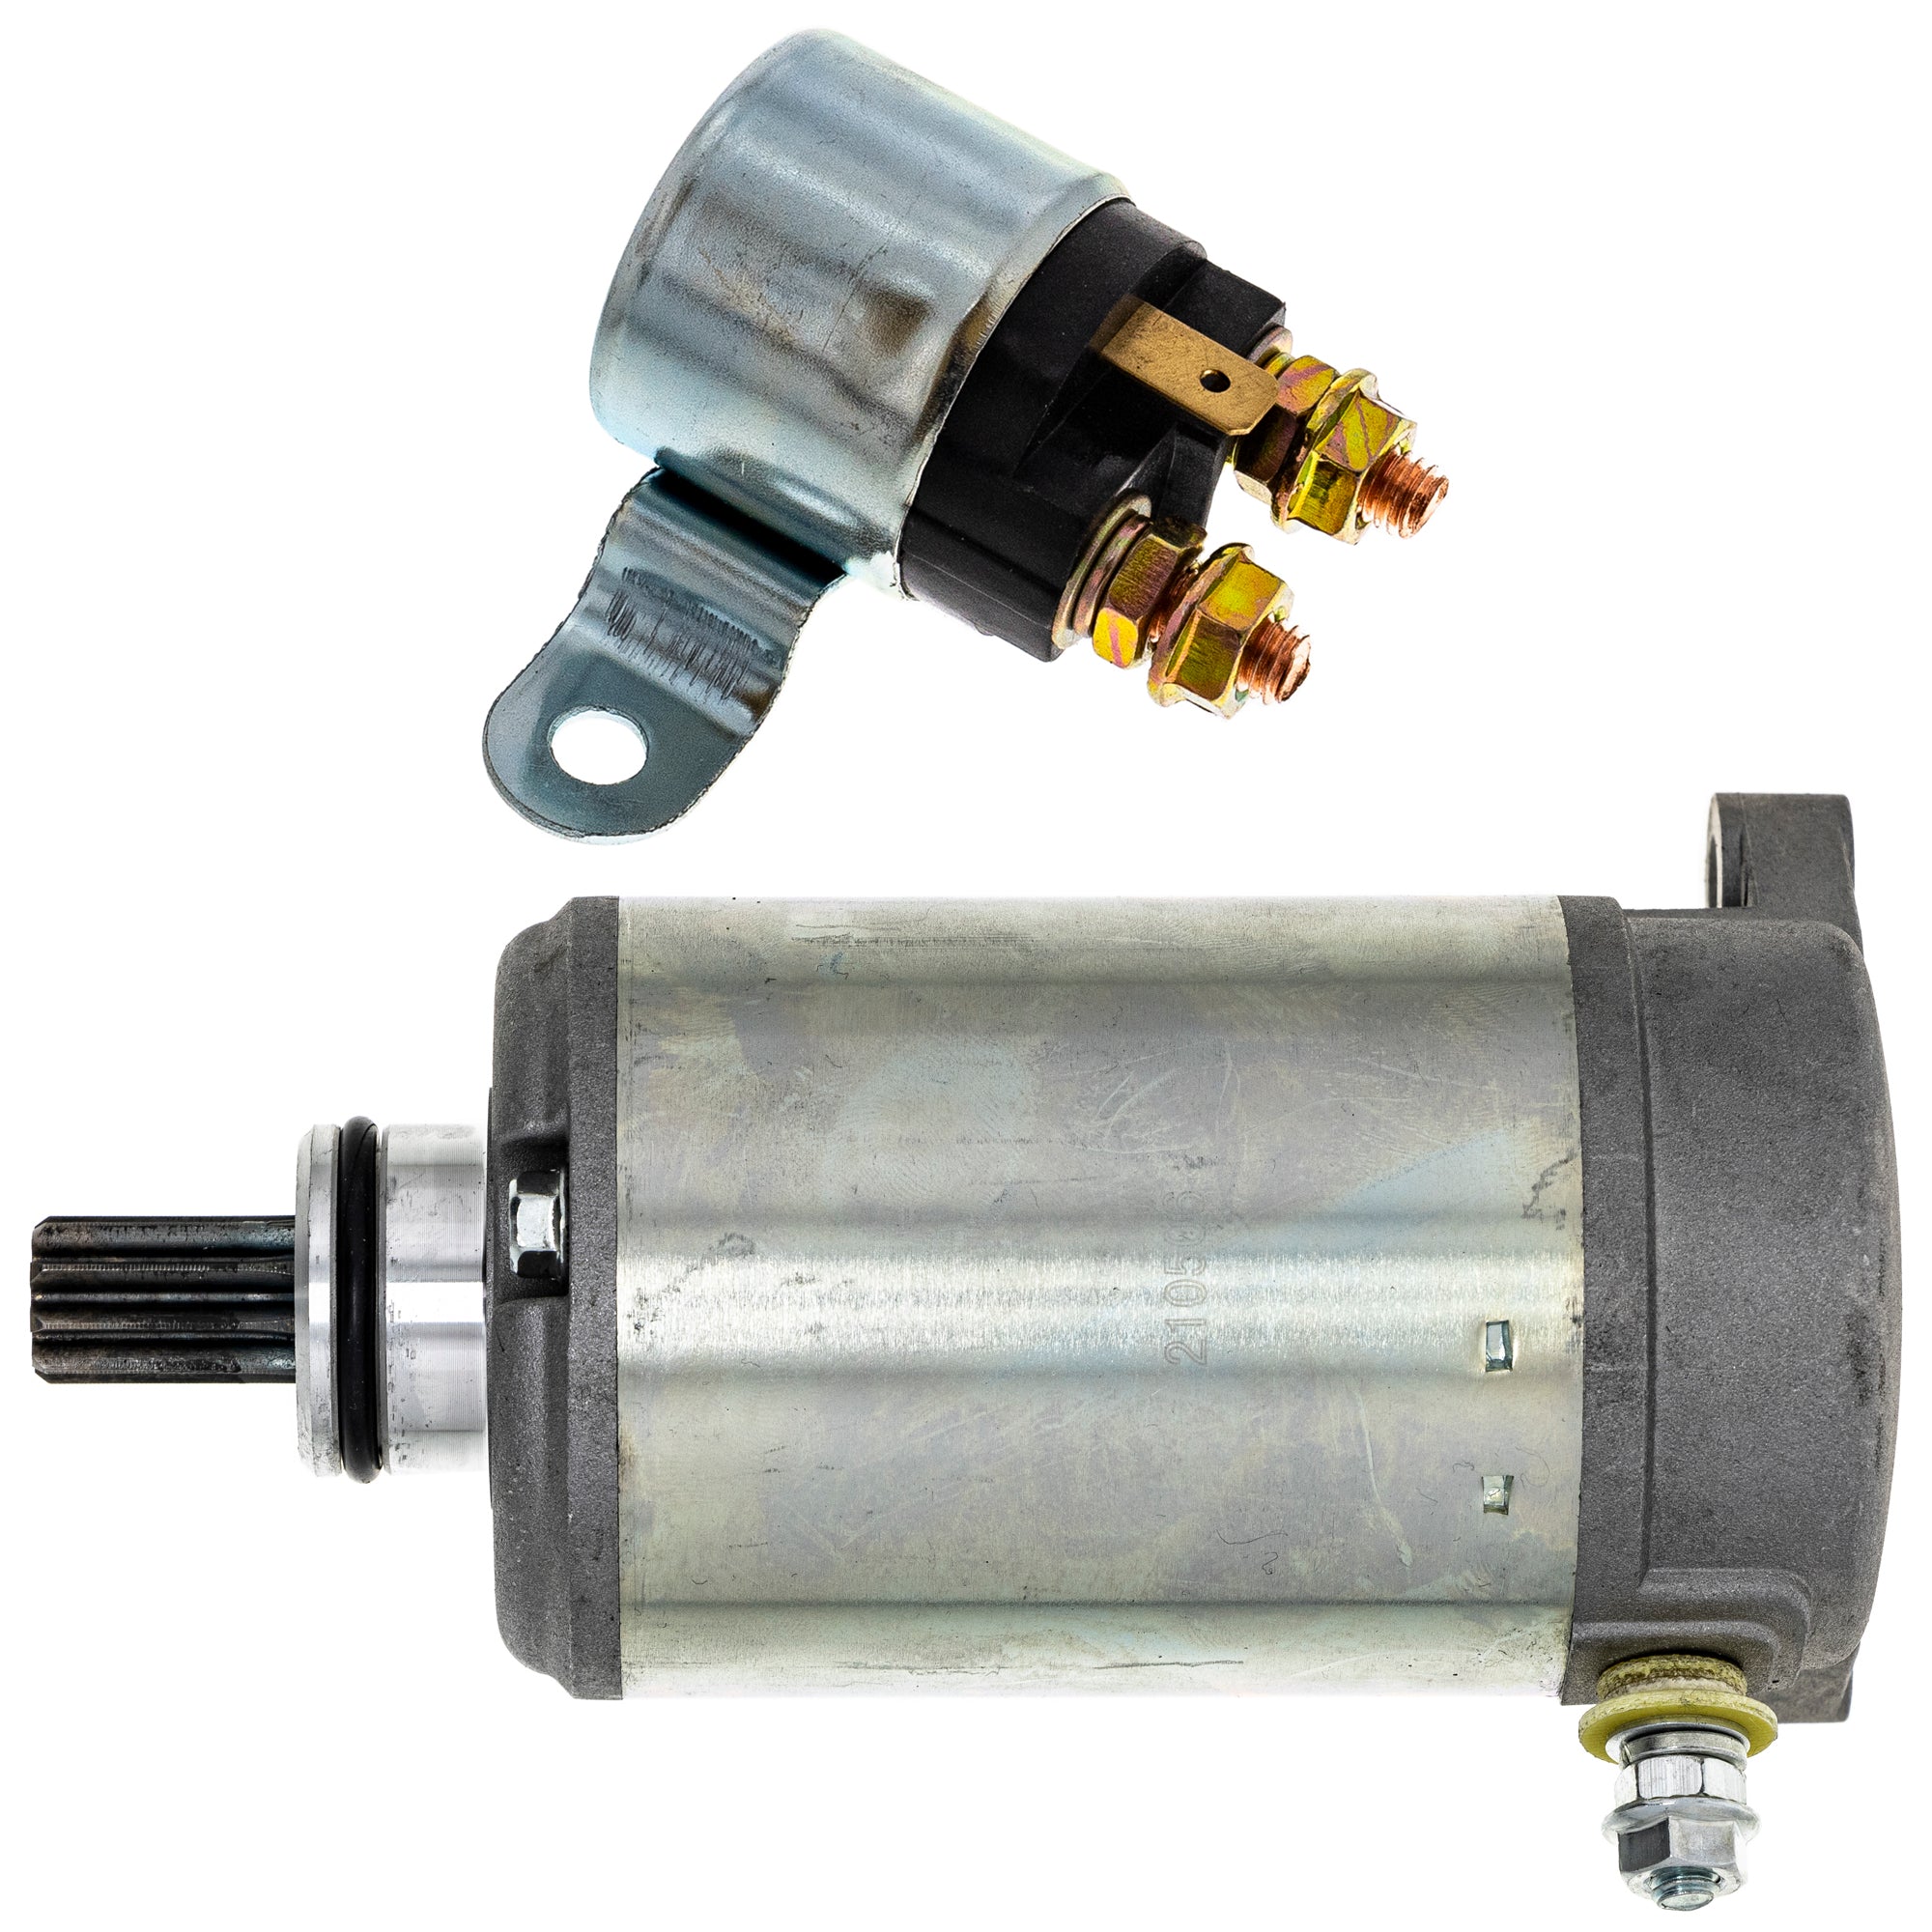 Starter Motor & Solenoid Kit for zOTHER BRP Can-Am Ski-Doo Sea-Doo Traxter Renegade Rally NICHE MK1007642